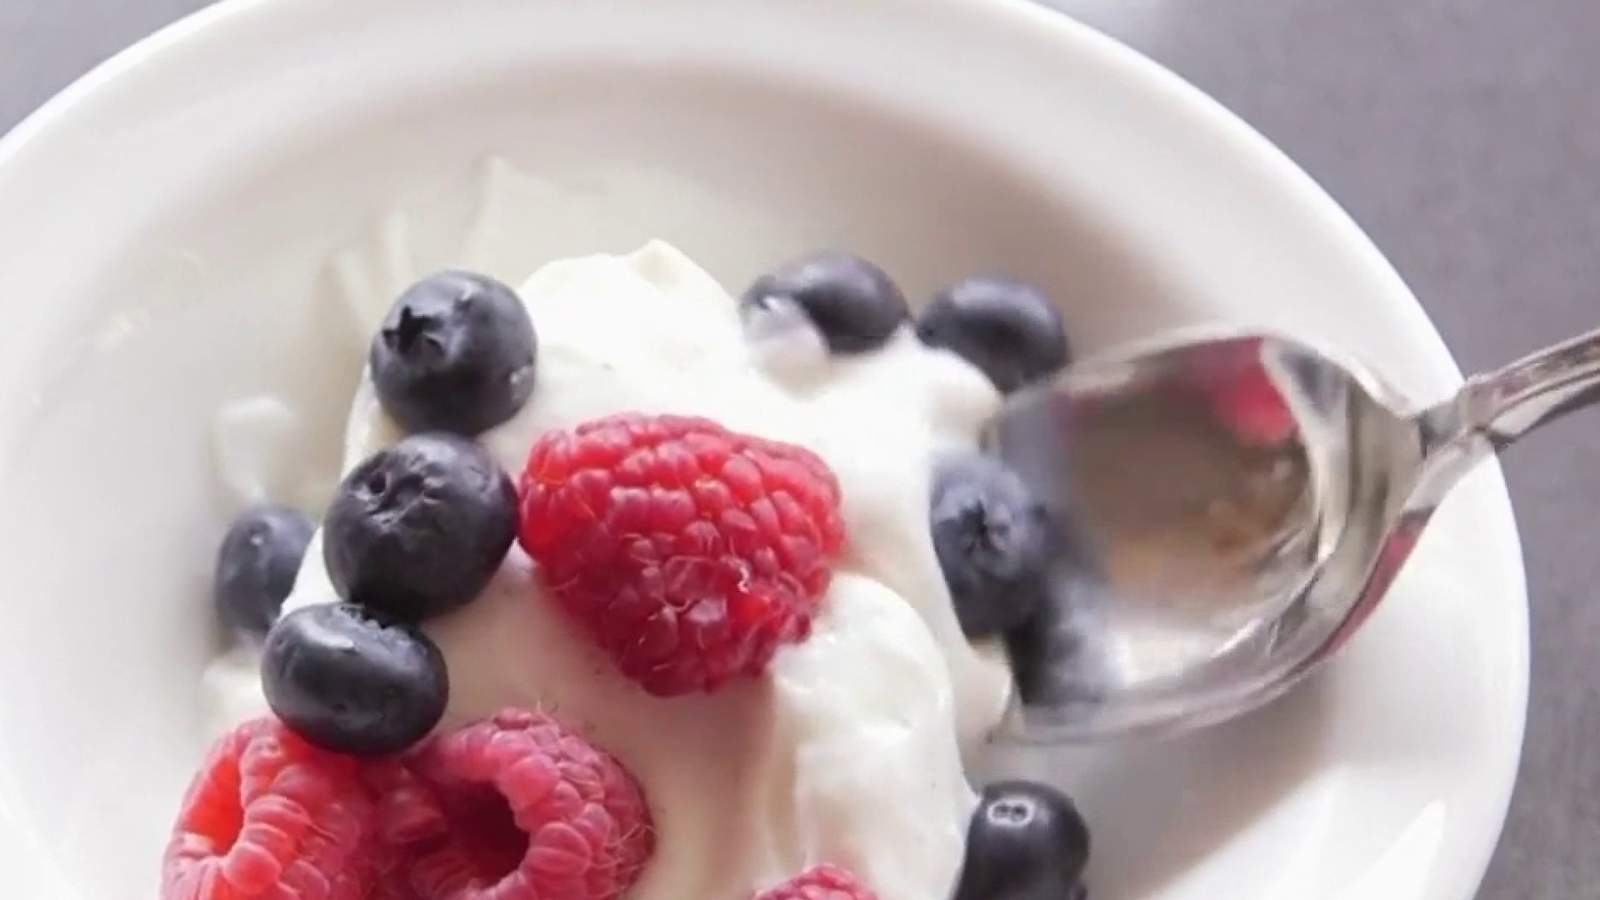 Looking for a nutritious, yummy yogurt? Try these